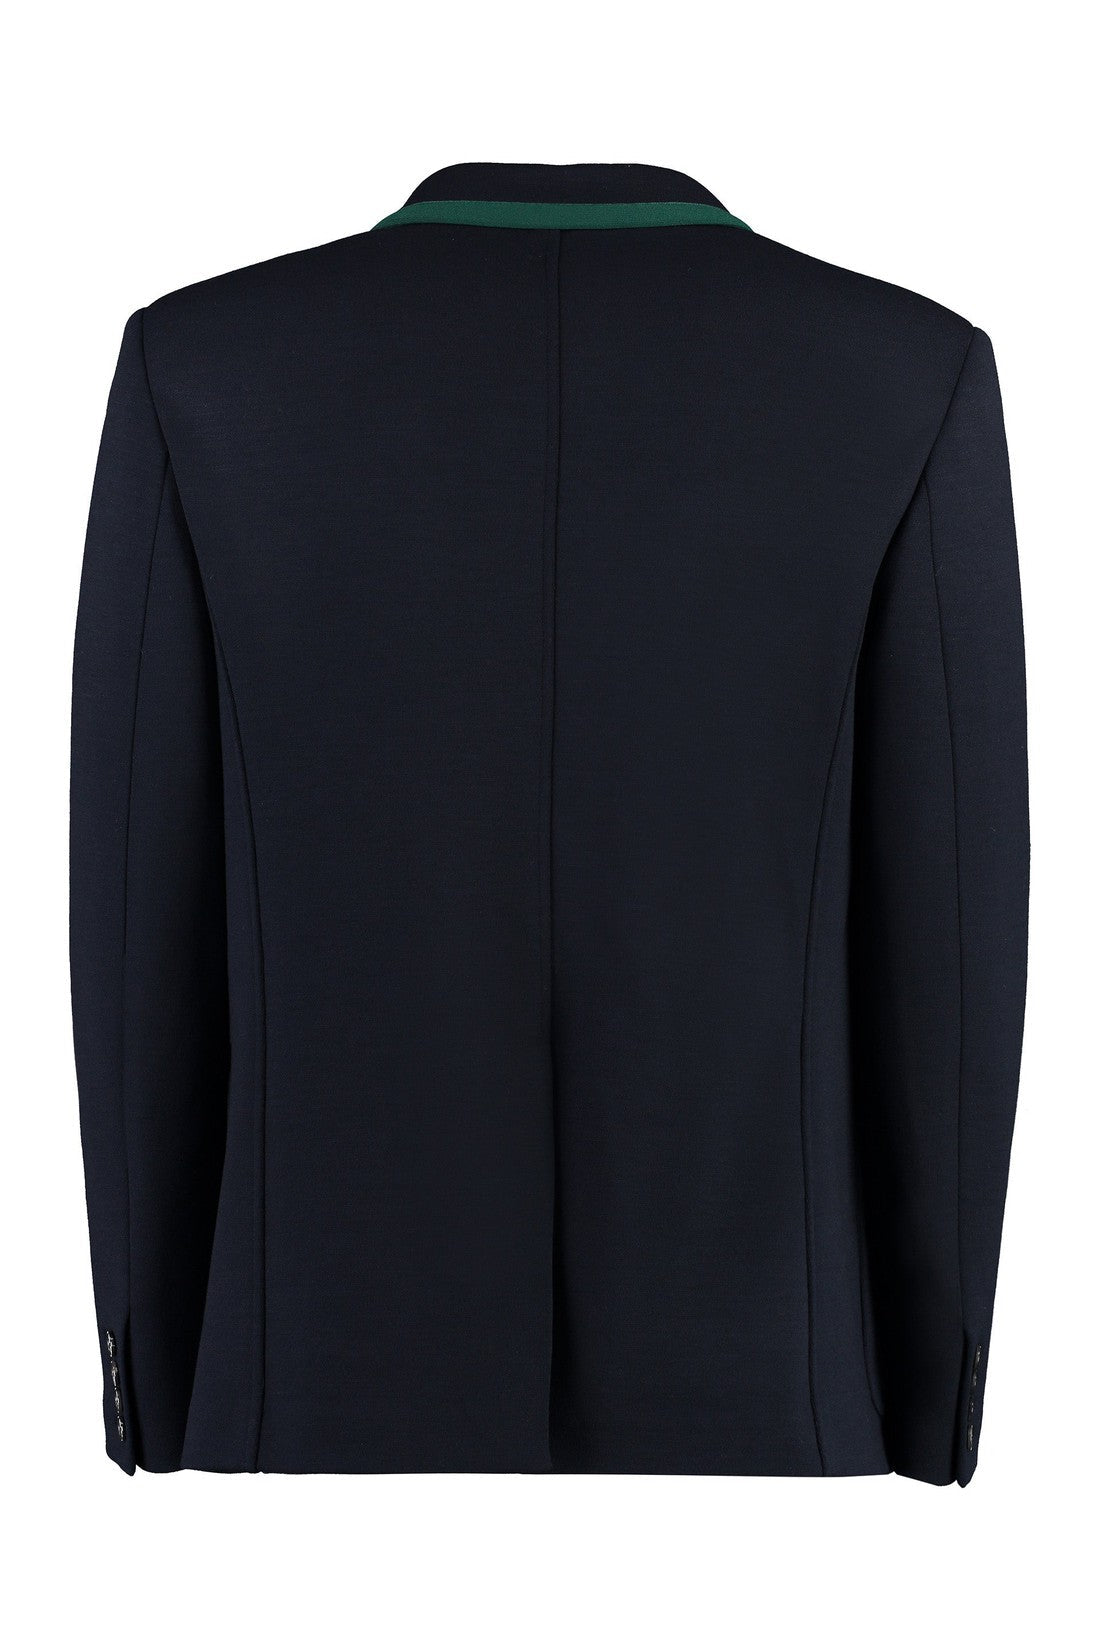 Valentino-OUTLET-SALE-Wool single-breasted blazer-ARCHIVIST